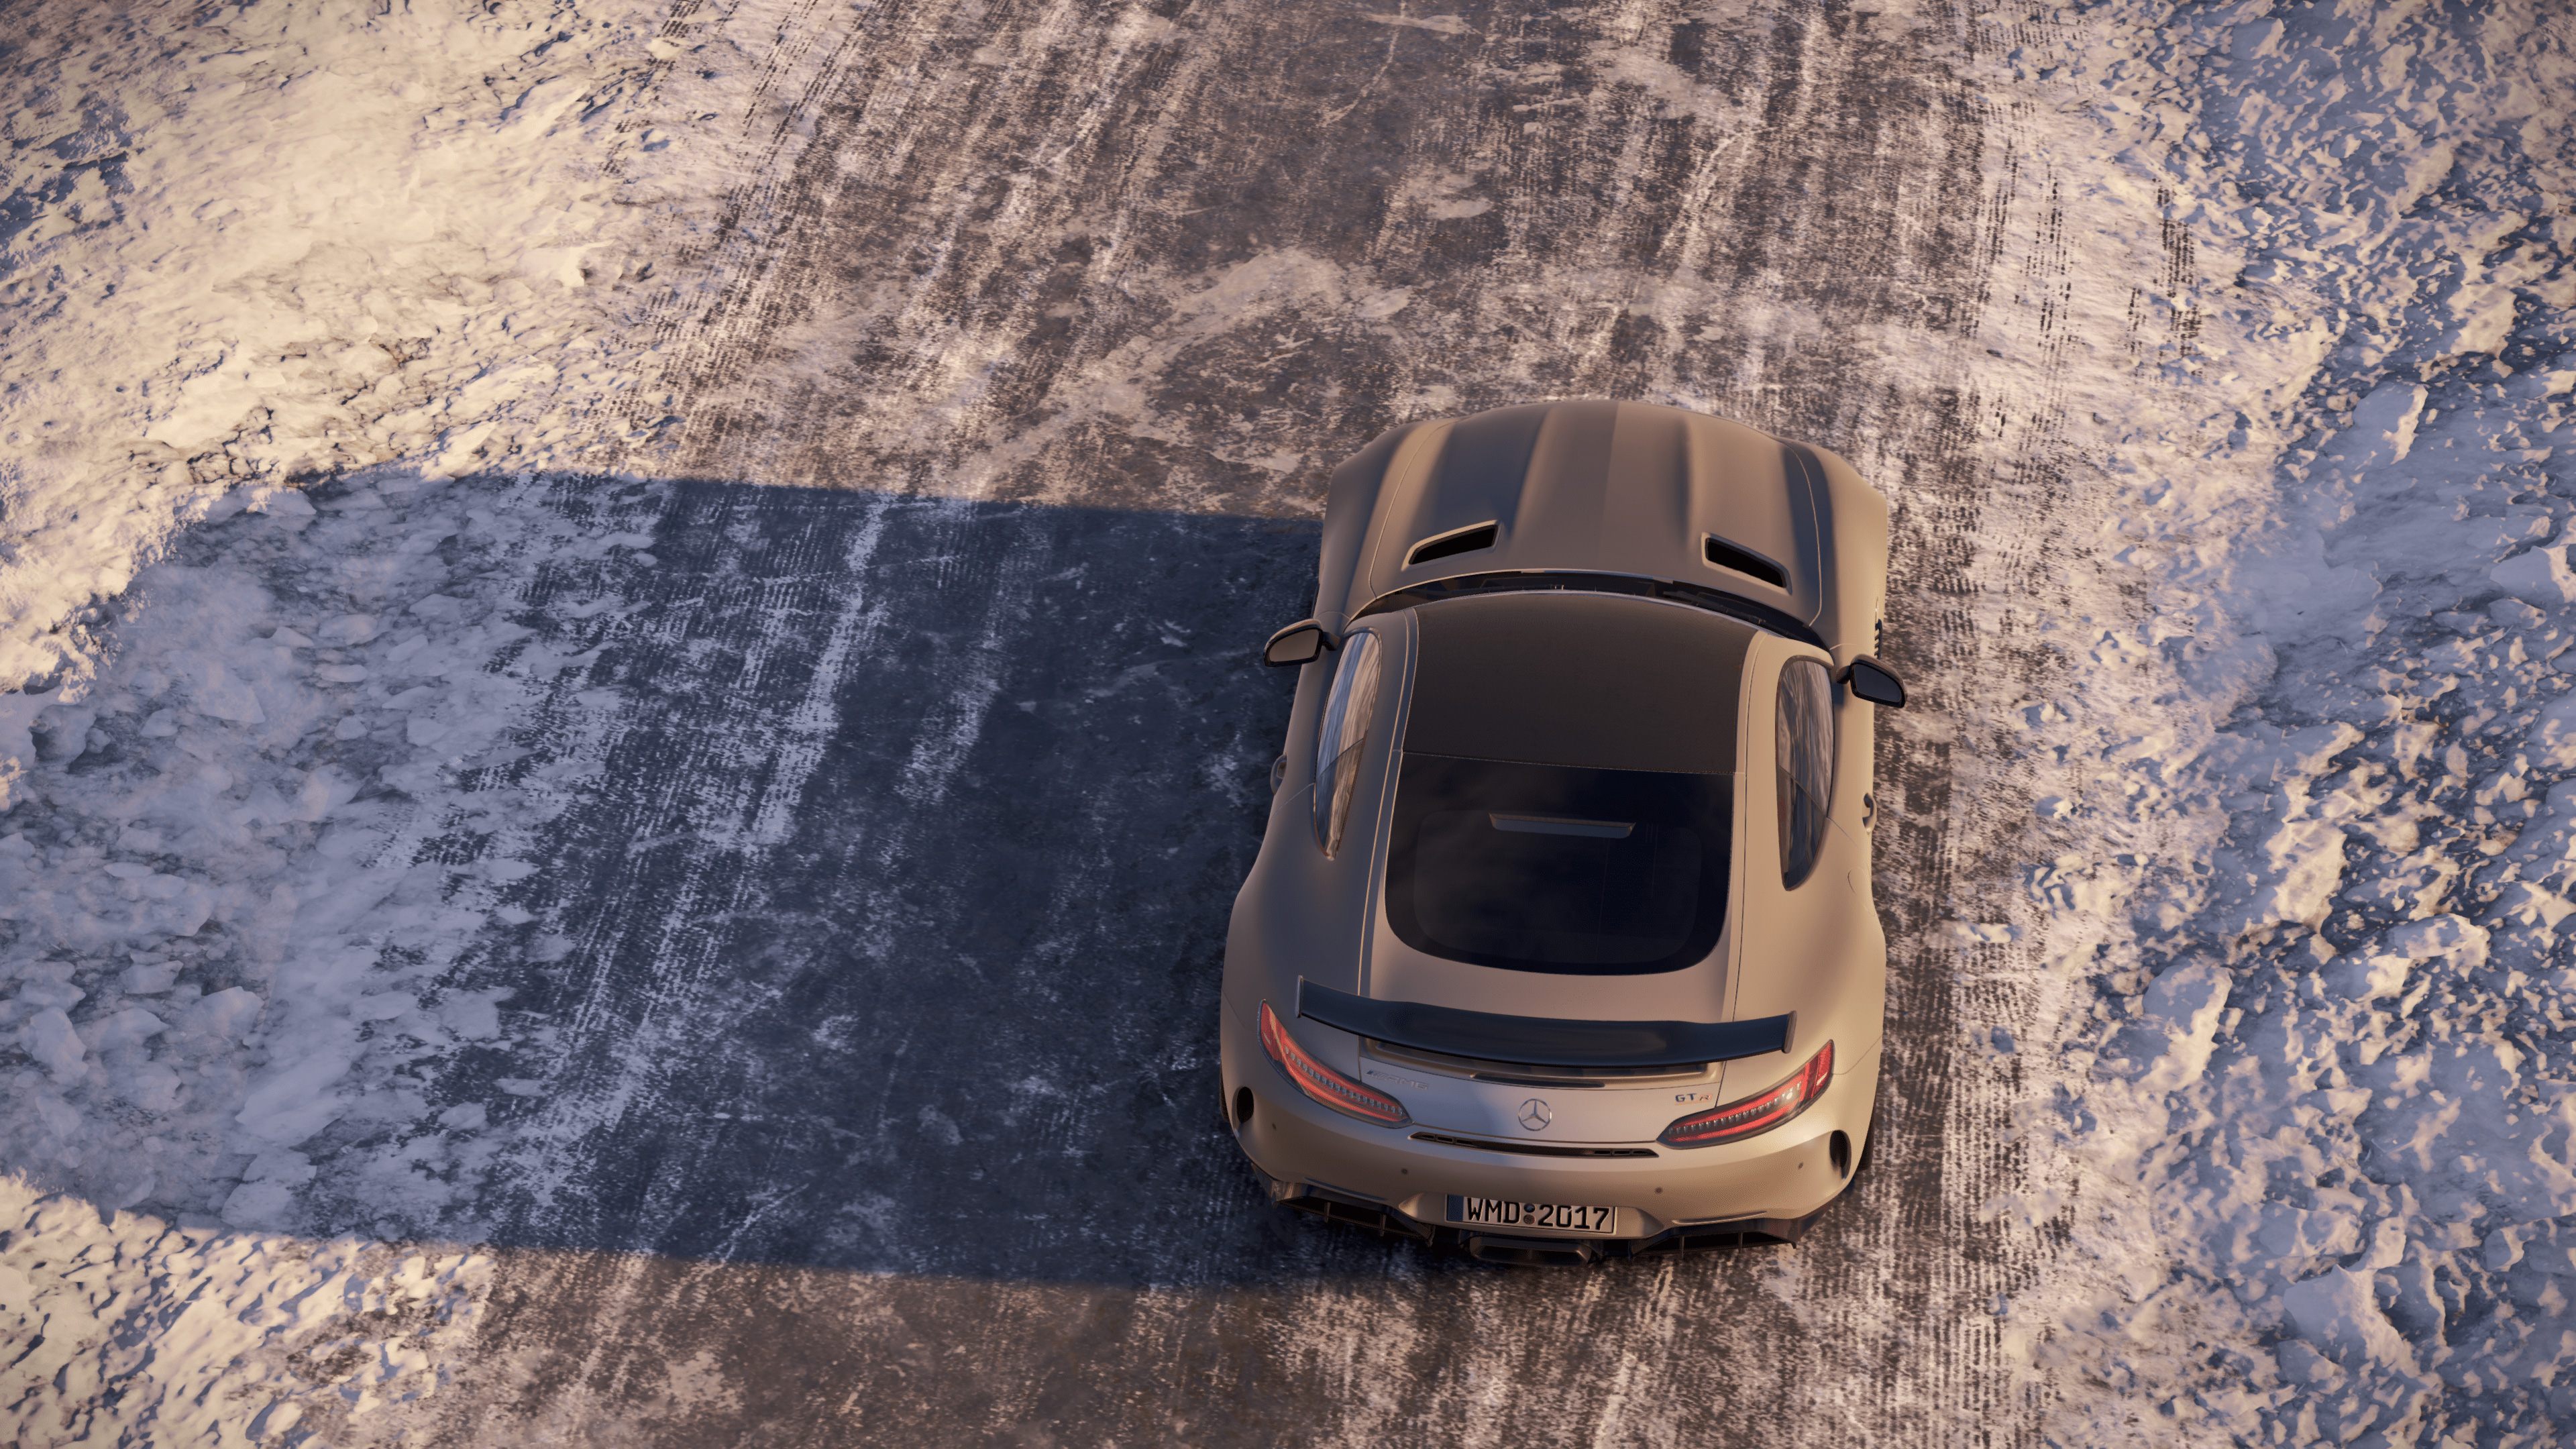 Mercedes Amg Gt R Project Cars - Project Cars 2 , HD Wallpaper & Backgrounds